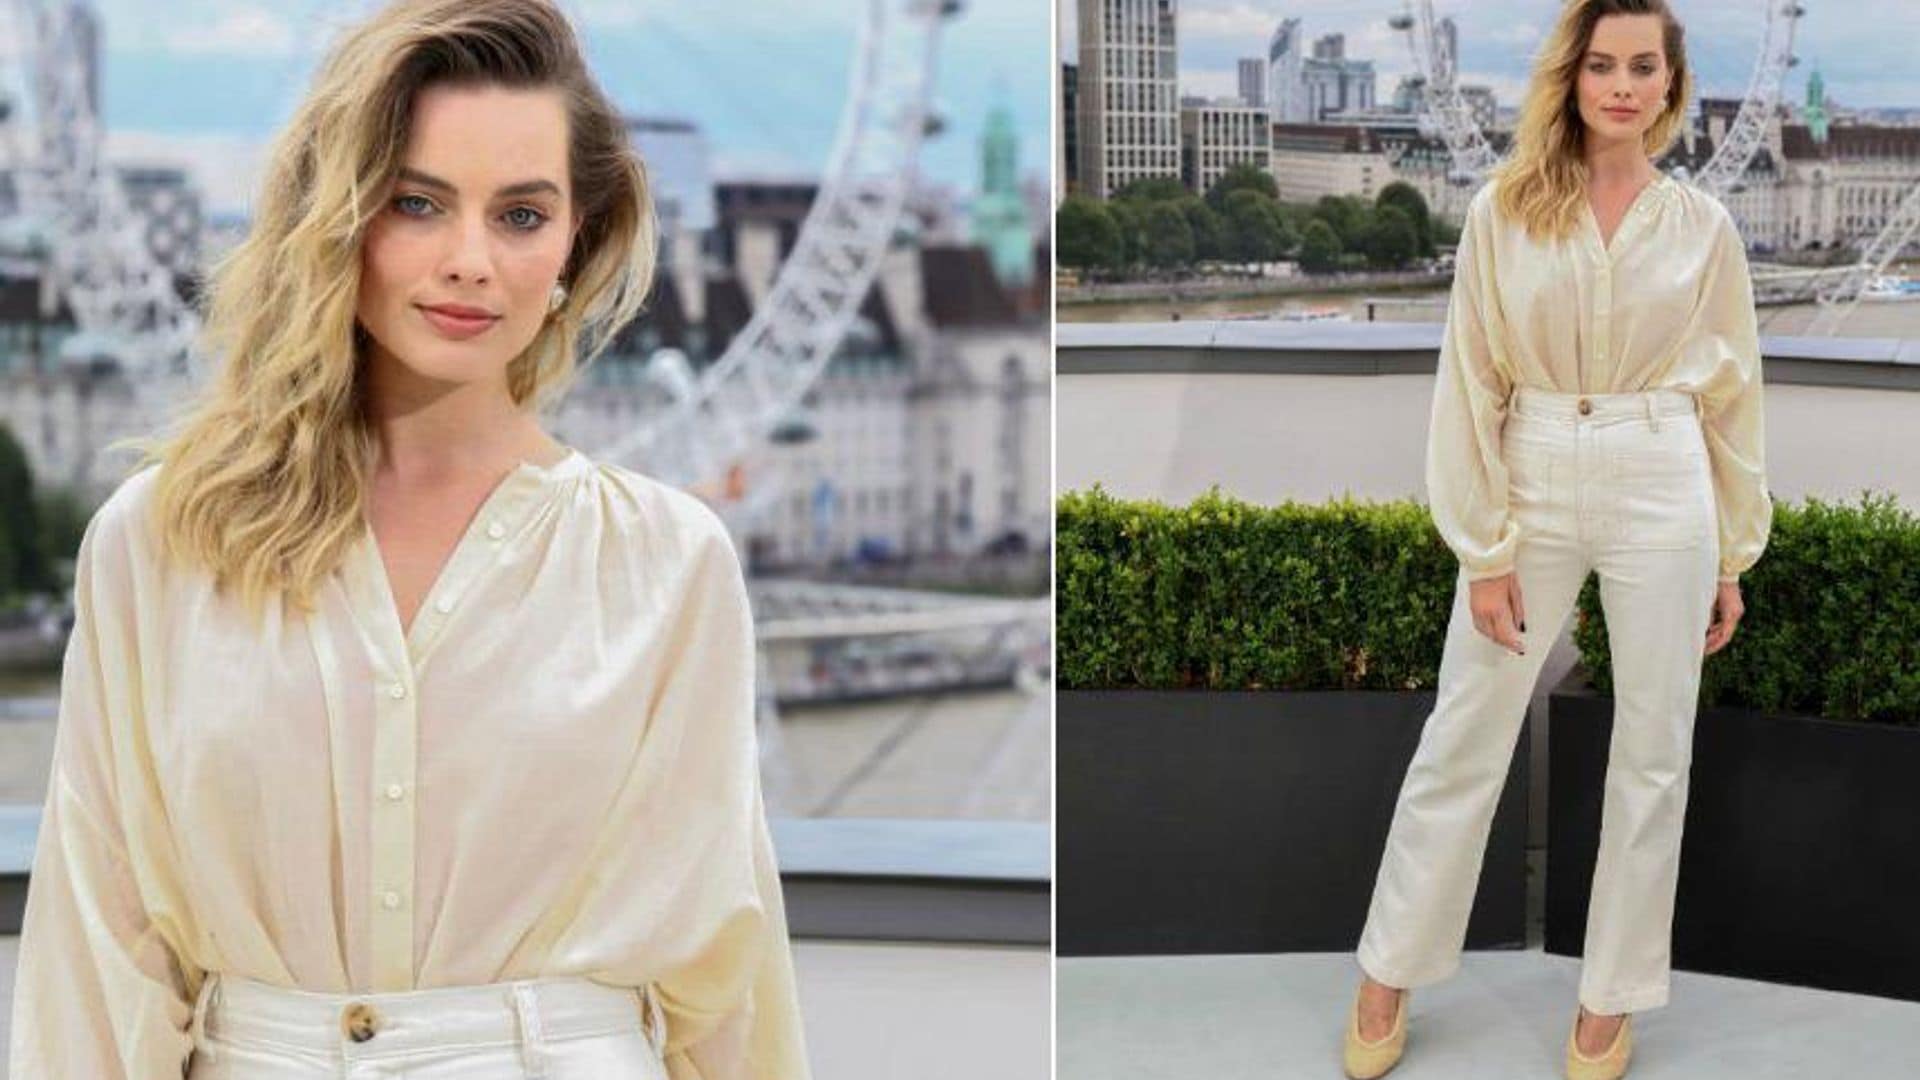 Recreate Margot Robbie's relaxed and vintage look